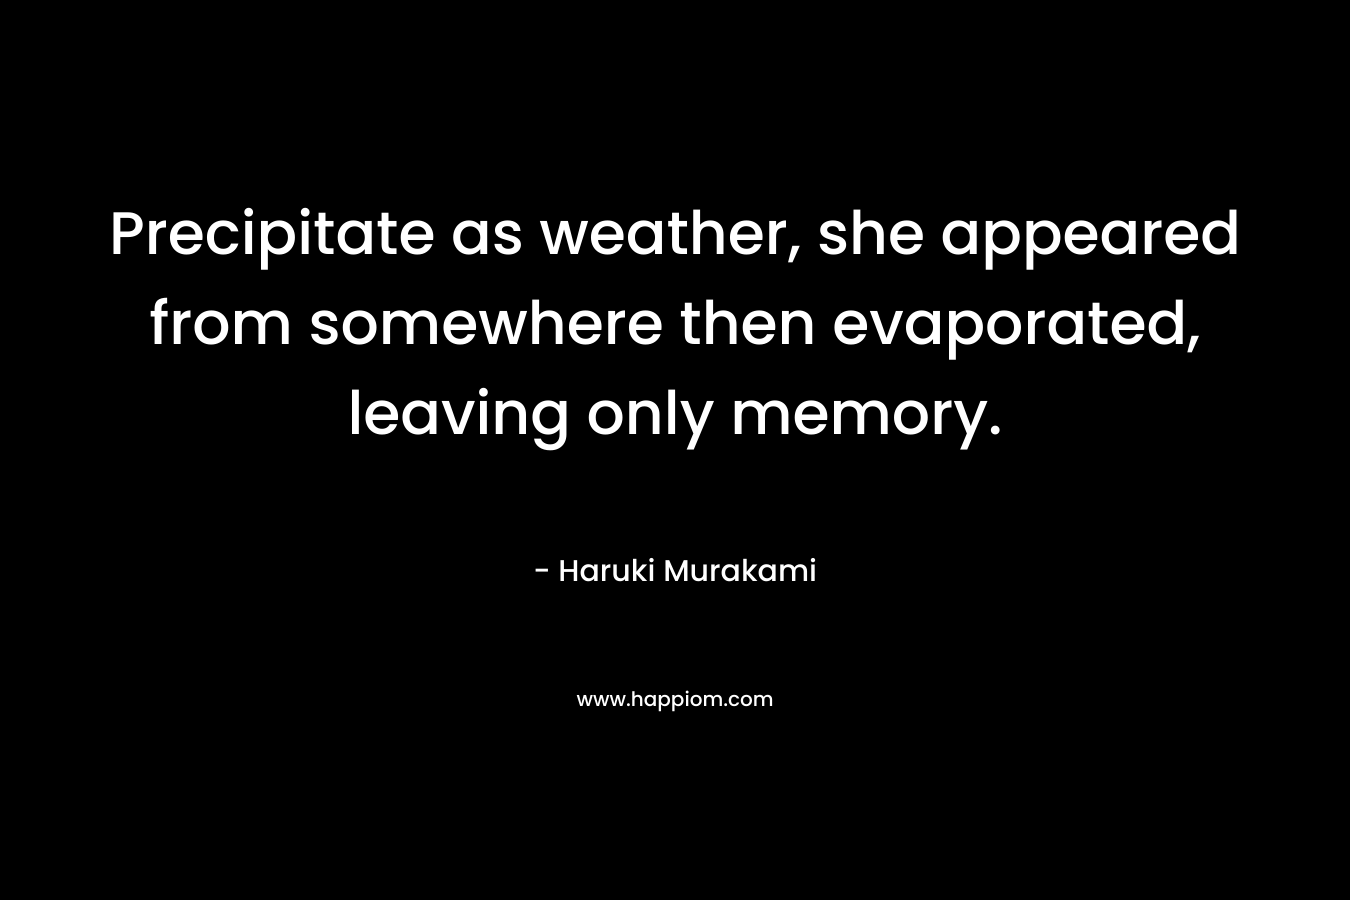 Precipitate as weather, she appeared from somewhere then evaporated, leaving only memory. – Haruki Murakami